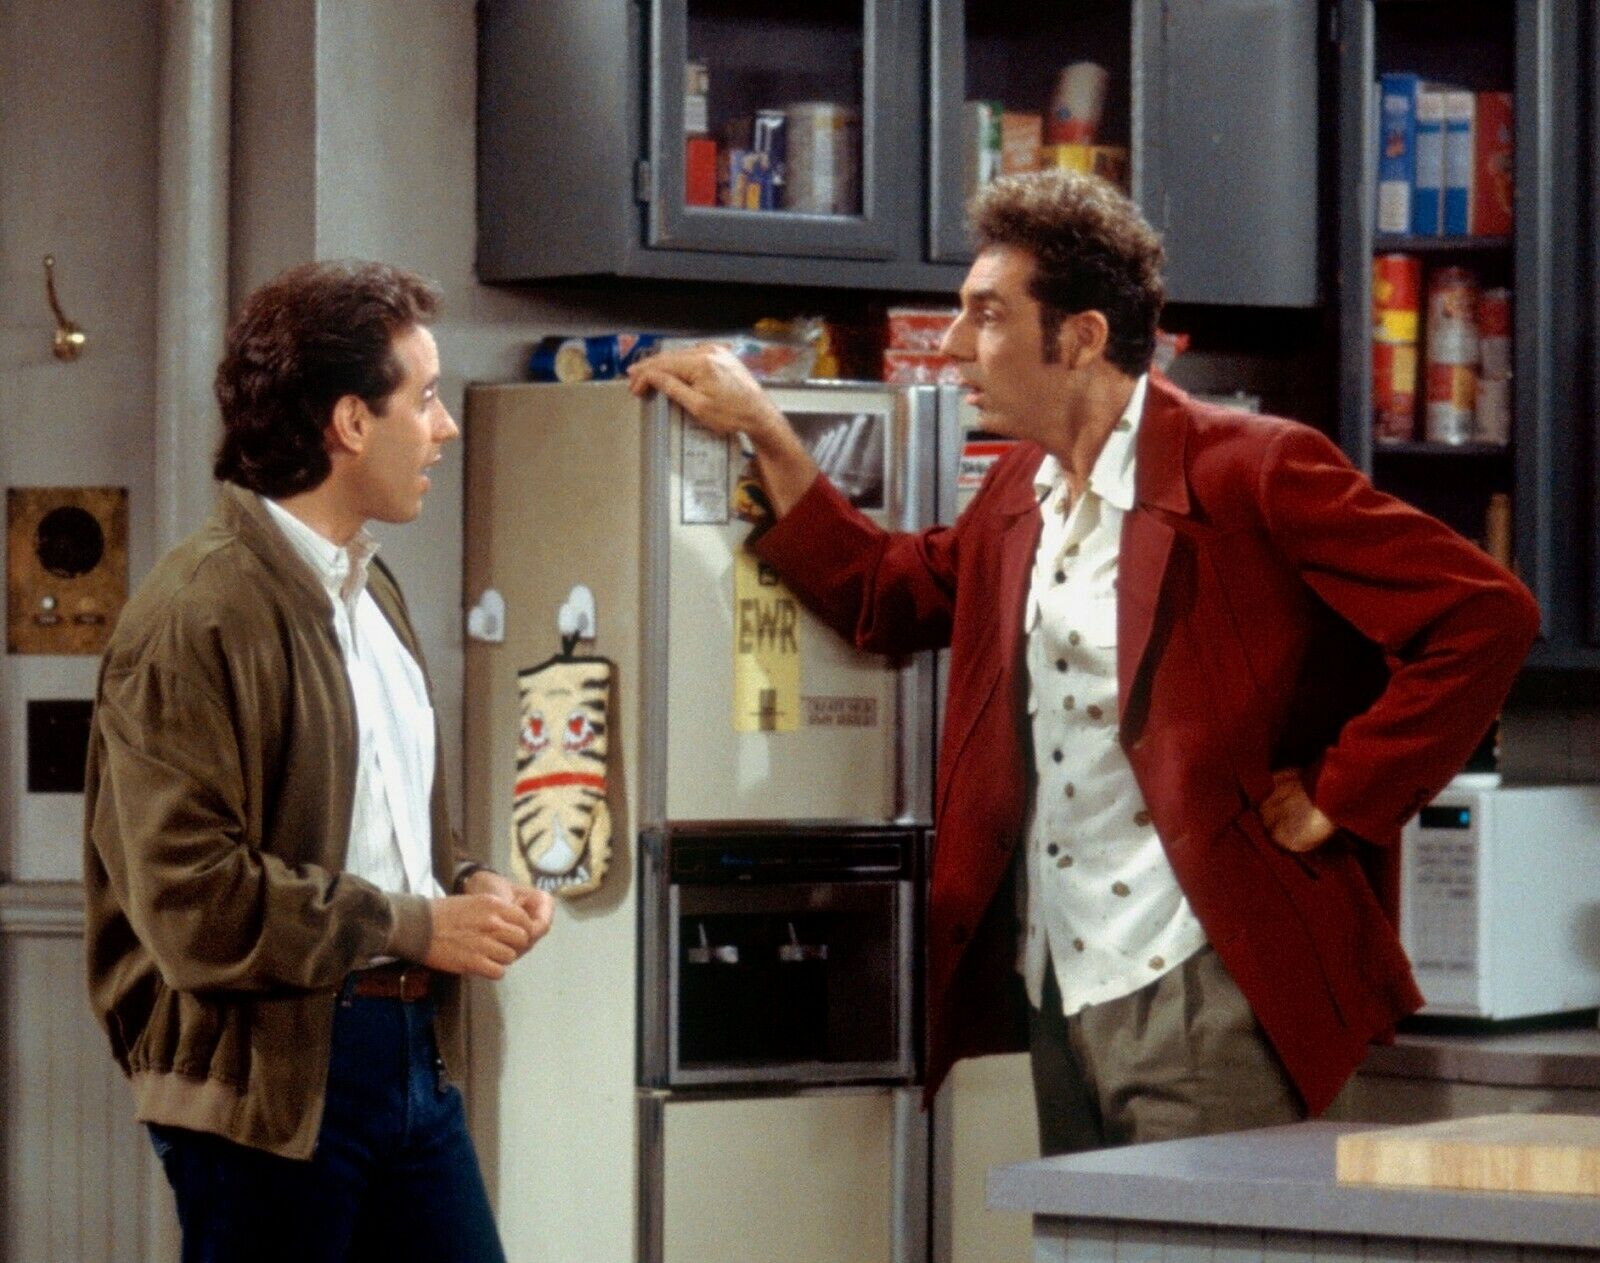 Seinfeld - Tv Show Photo #28 - Episode Photo - Jerry And Kramer